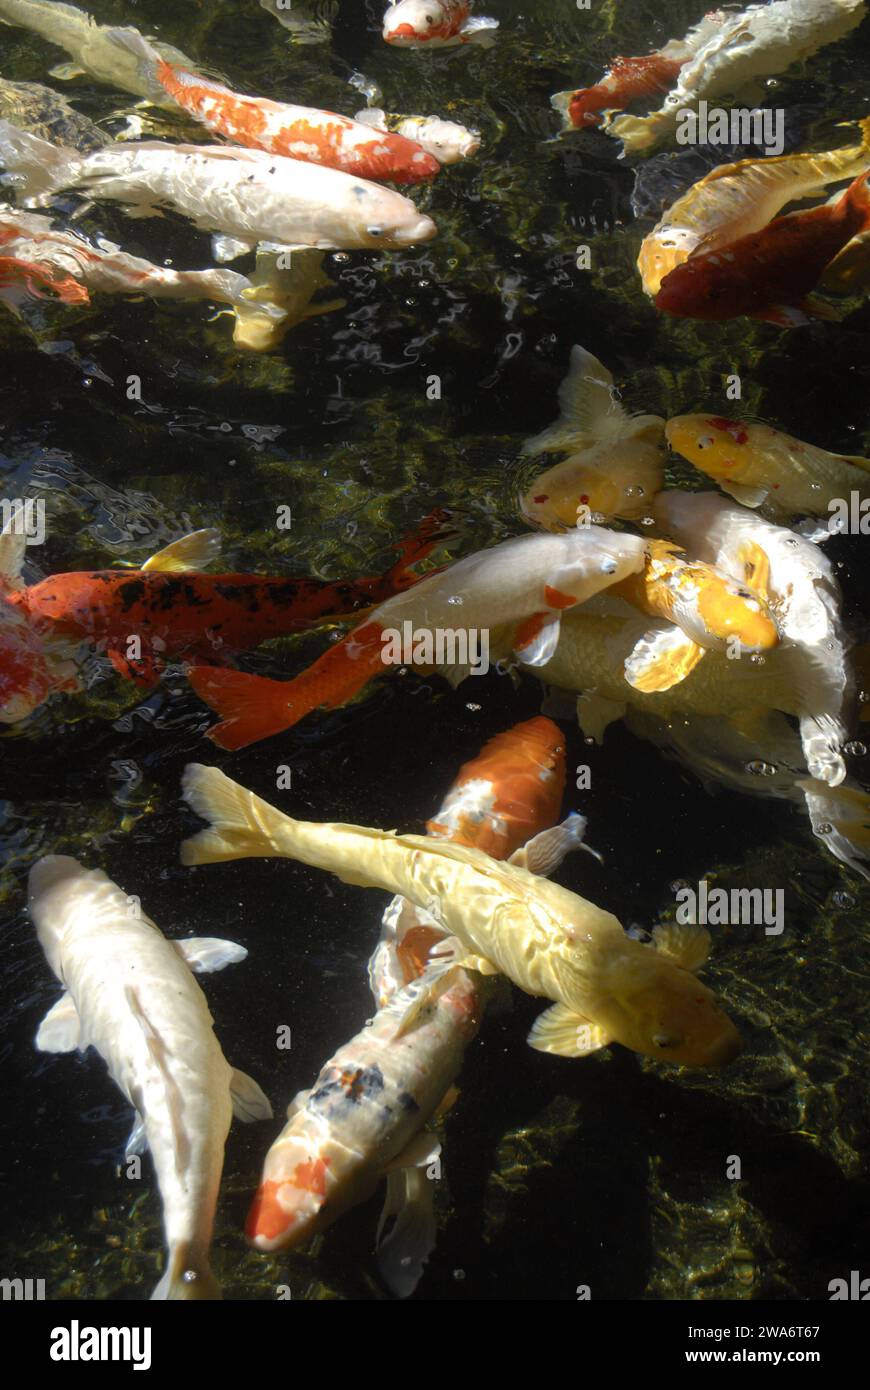 Maui .Hawaii islands ,USA  colourful fish in pond 11 January 2015 hoto by Francis Joseph Dean/Deanpictures Stock Photo